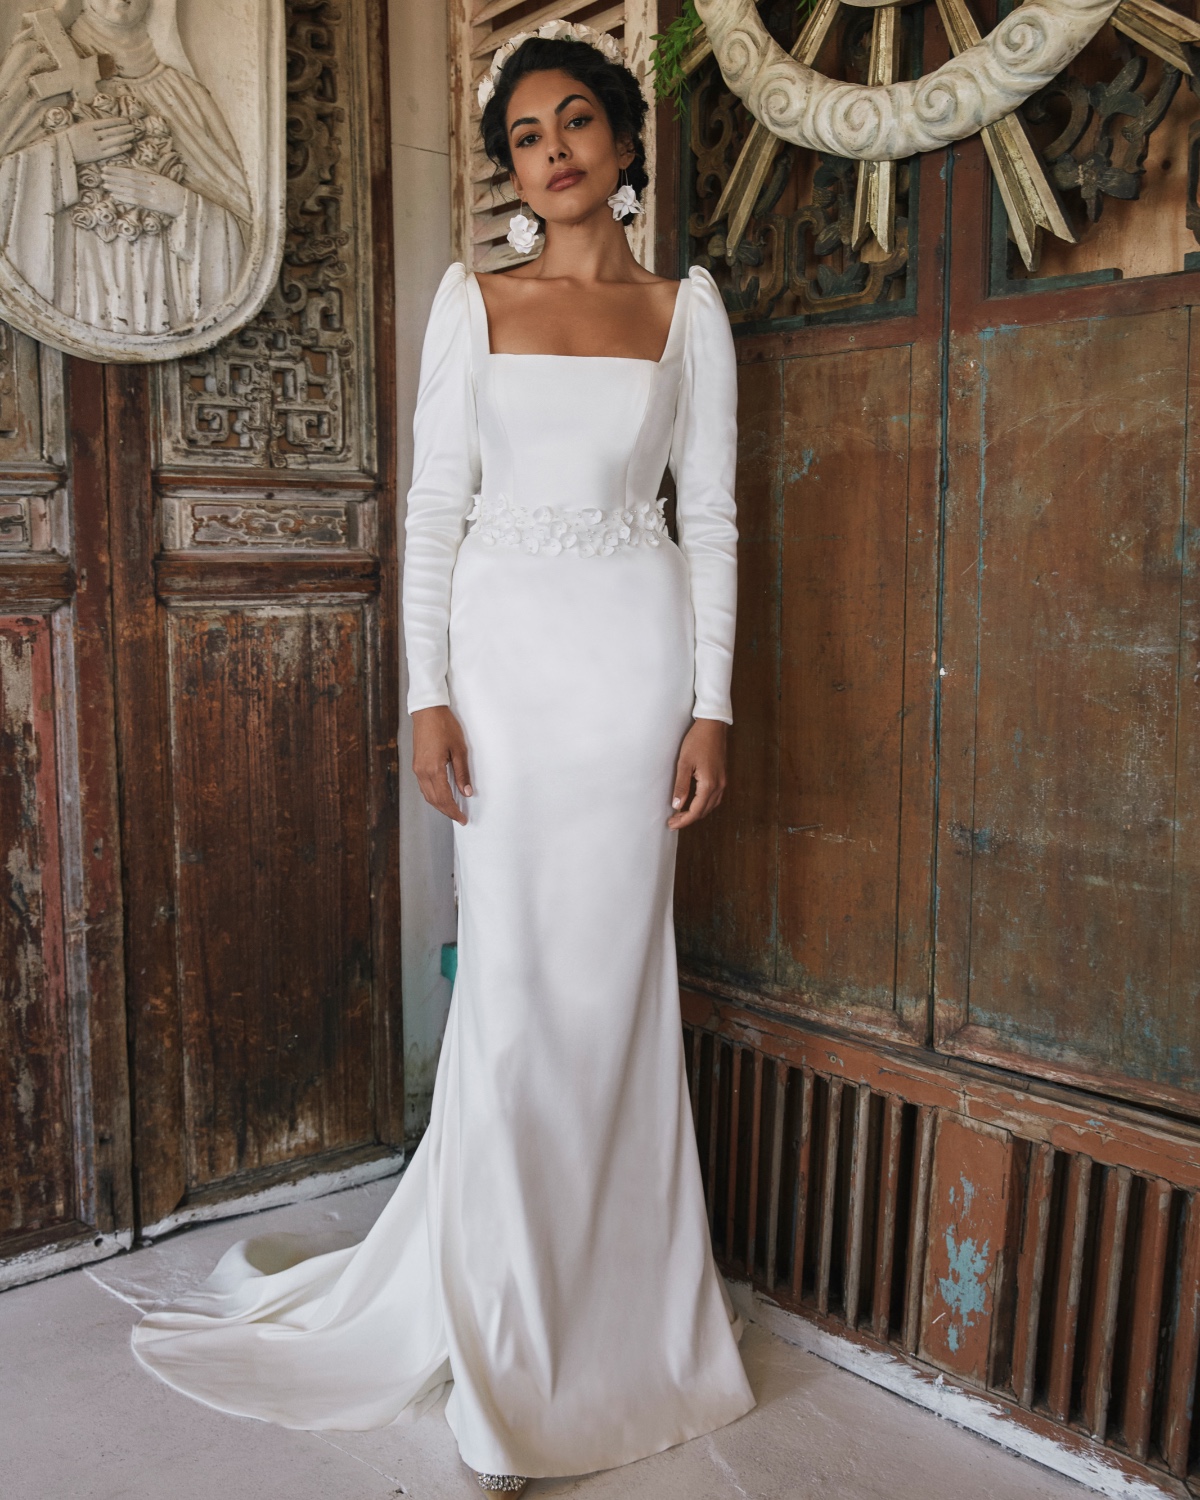 The Best Long Sleeve Wedding Dresses For a Show-Stopping Look